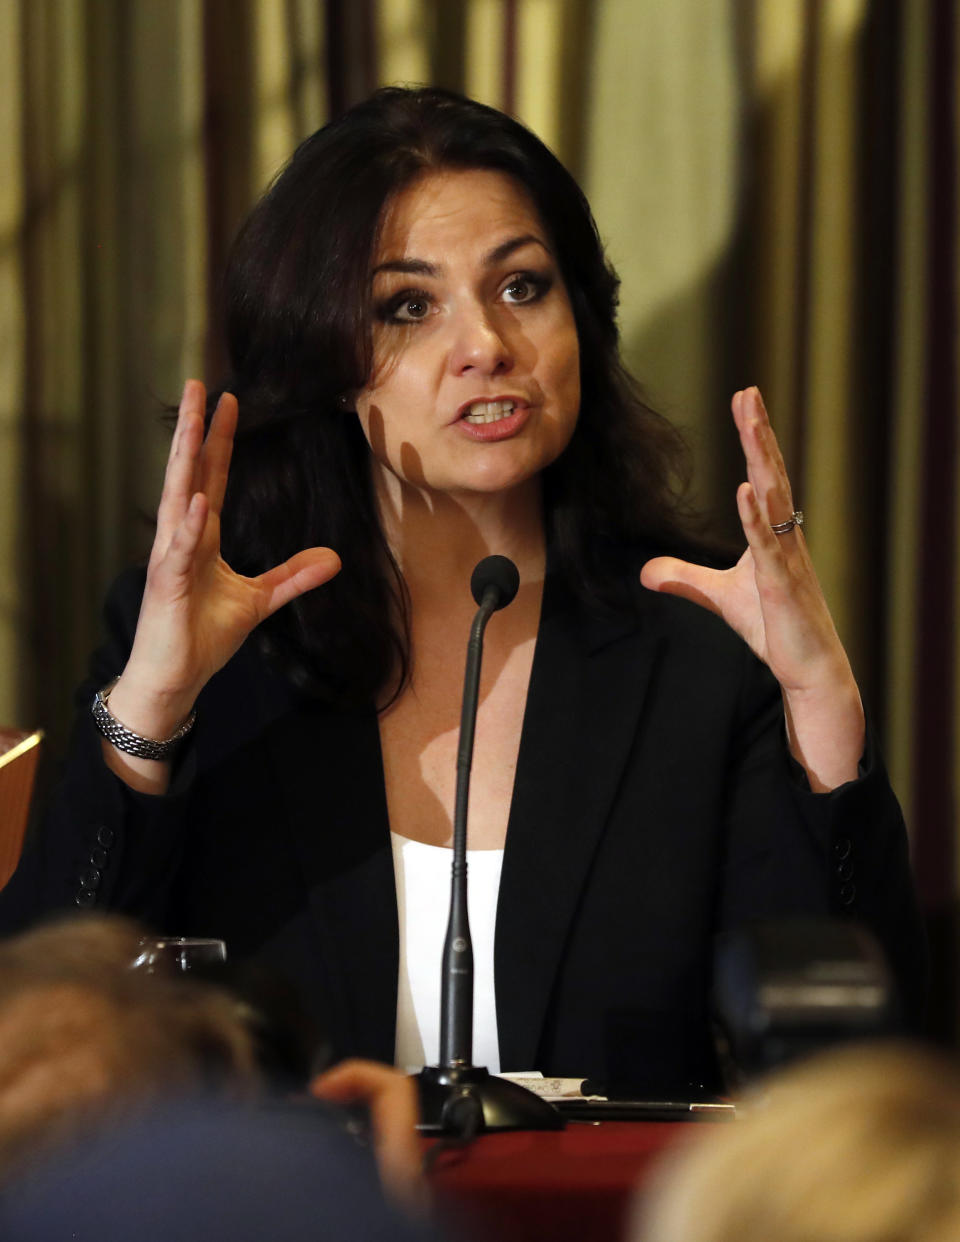 British lawmaker Heidi Allen, speaks at a press conference in Westminster in London, Wednesday, Feb. 20, 2019. Cracks in Britain's political party system yawned wider Wednesday, as three pro-European lawmakers - Soubry, Allen and Wollaston - quit the governing Conservatives to join a newly formed centrist group of independents who are opposed to the government's plan for Britain's departure from the European Union. (AP Photo/Alastair Grant)